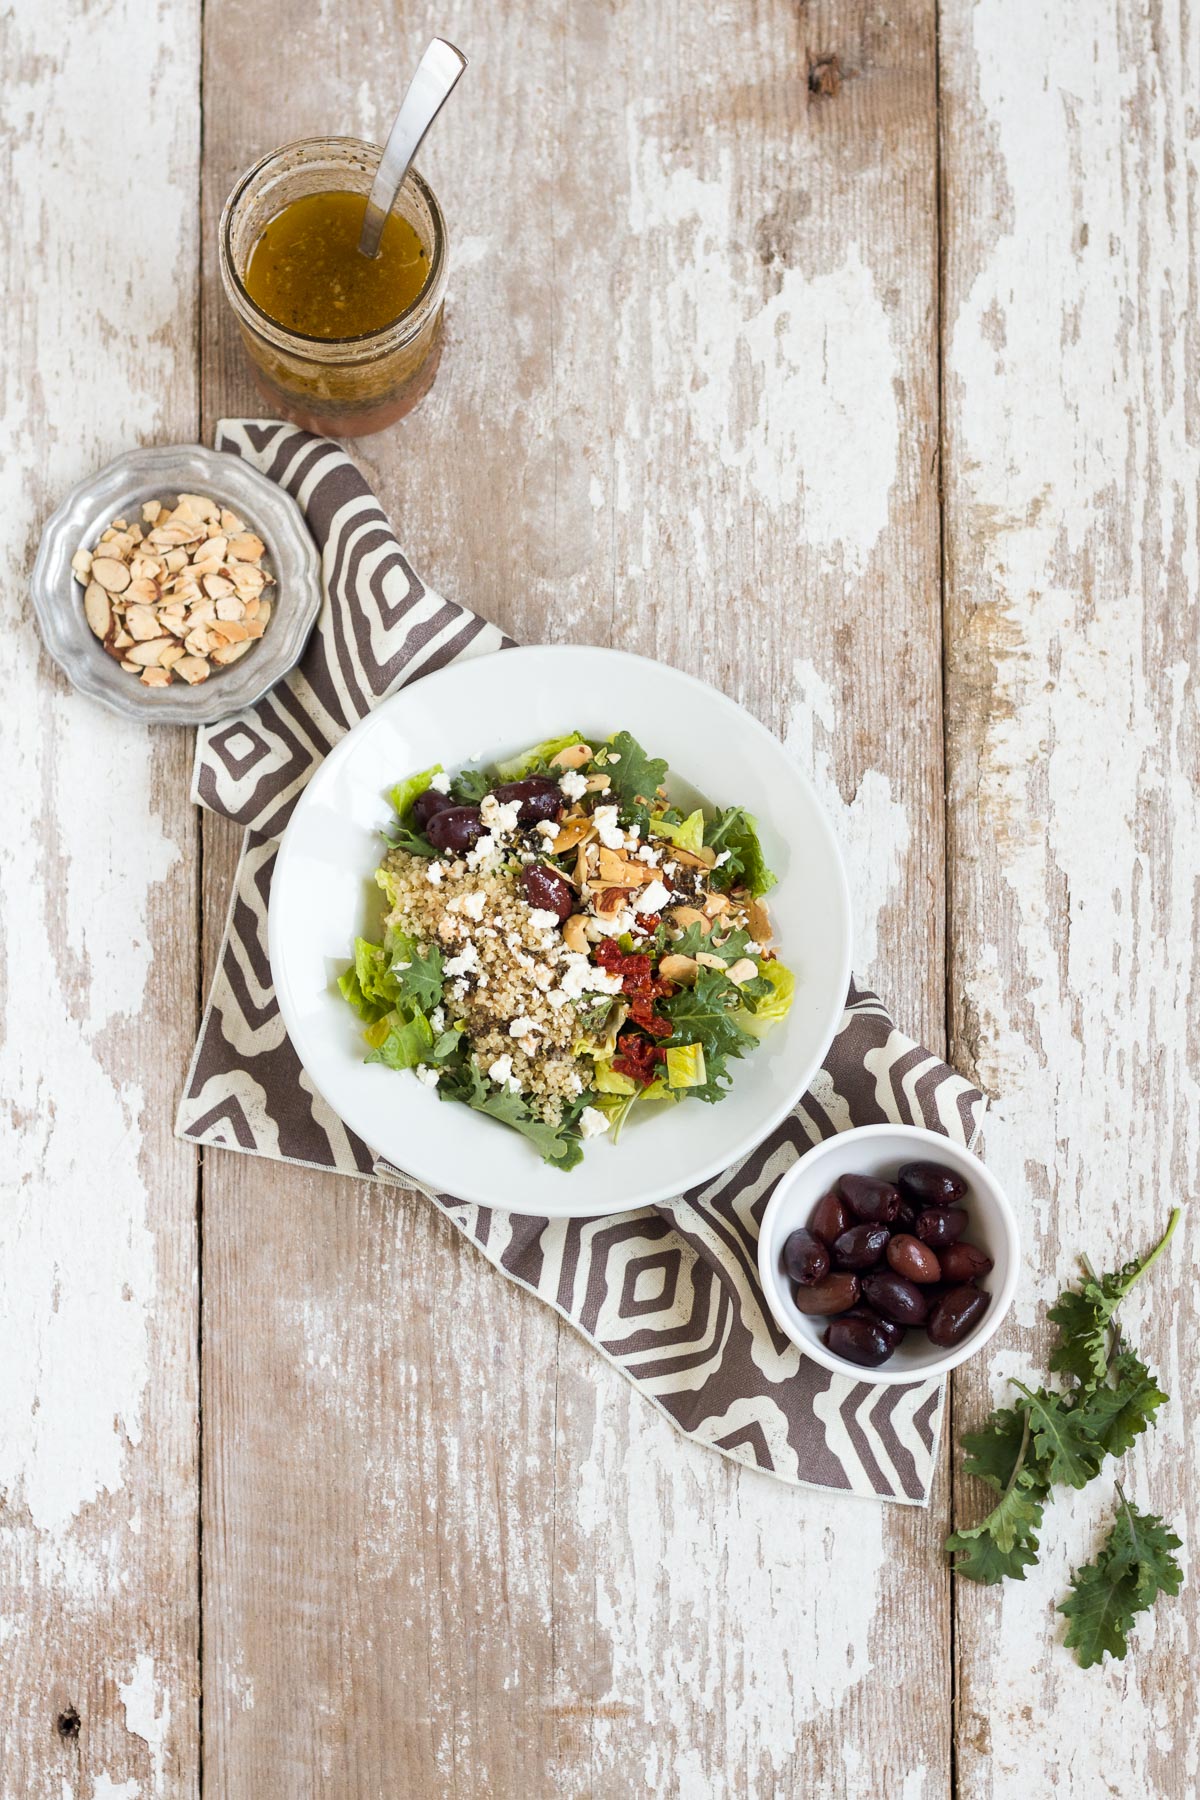 This Mediterranean Salad with Kale & Quinoa tastes just like the one served at Panera Bread. It's easy to make at home and is full of good-for-you ingredients like kale, quinoa, and almonds.